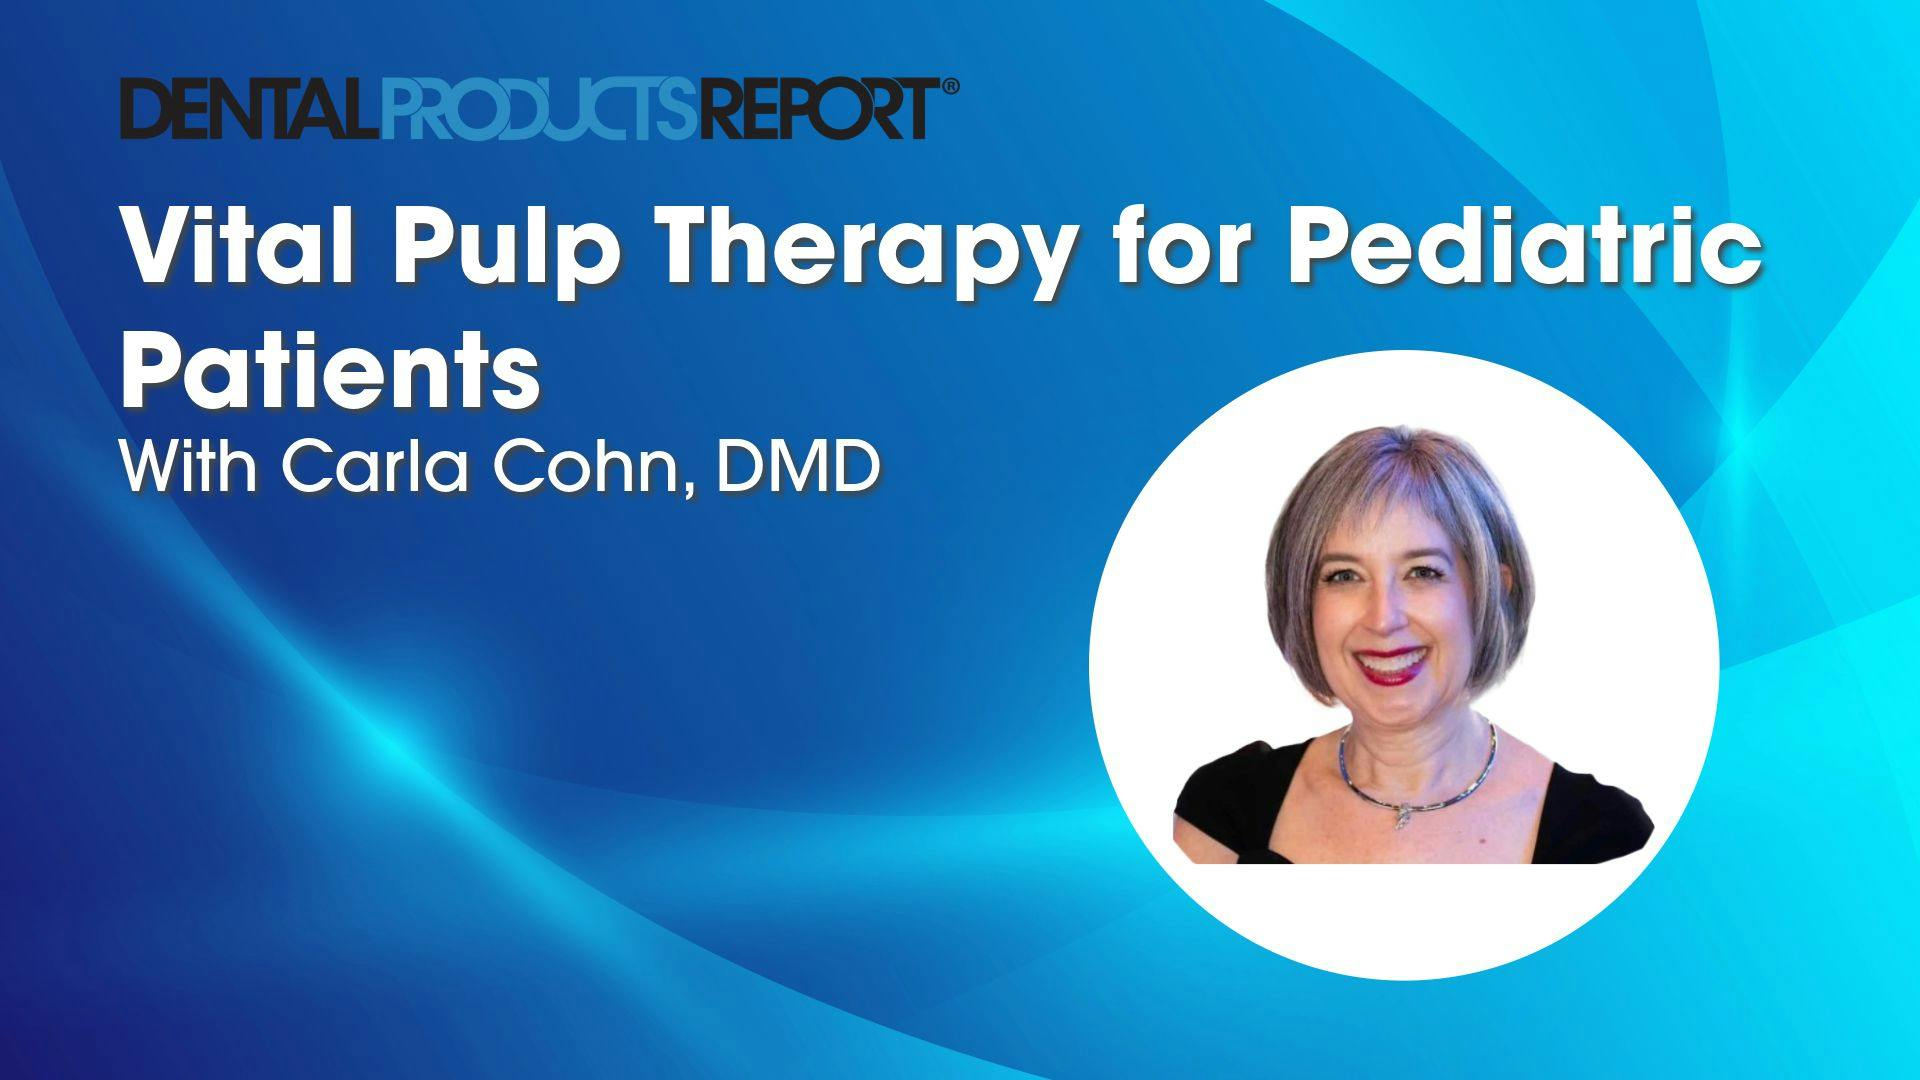 Vital Pulp Therapies for Pediatric Patients with Carla Cohn, DMD